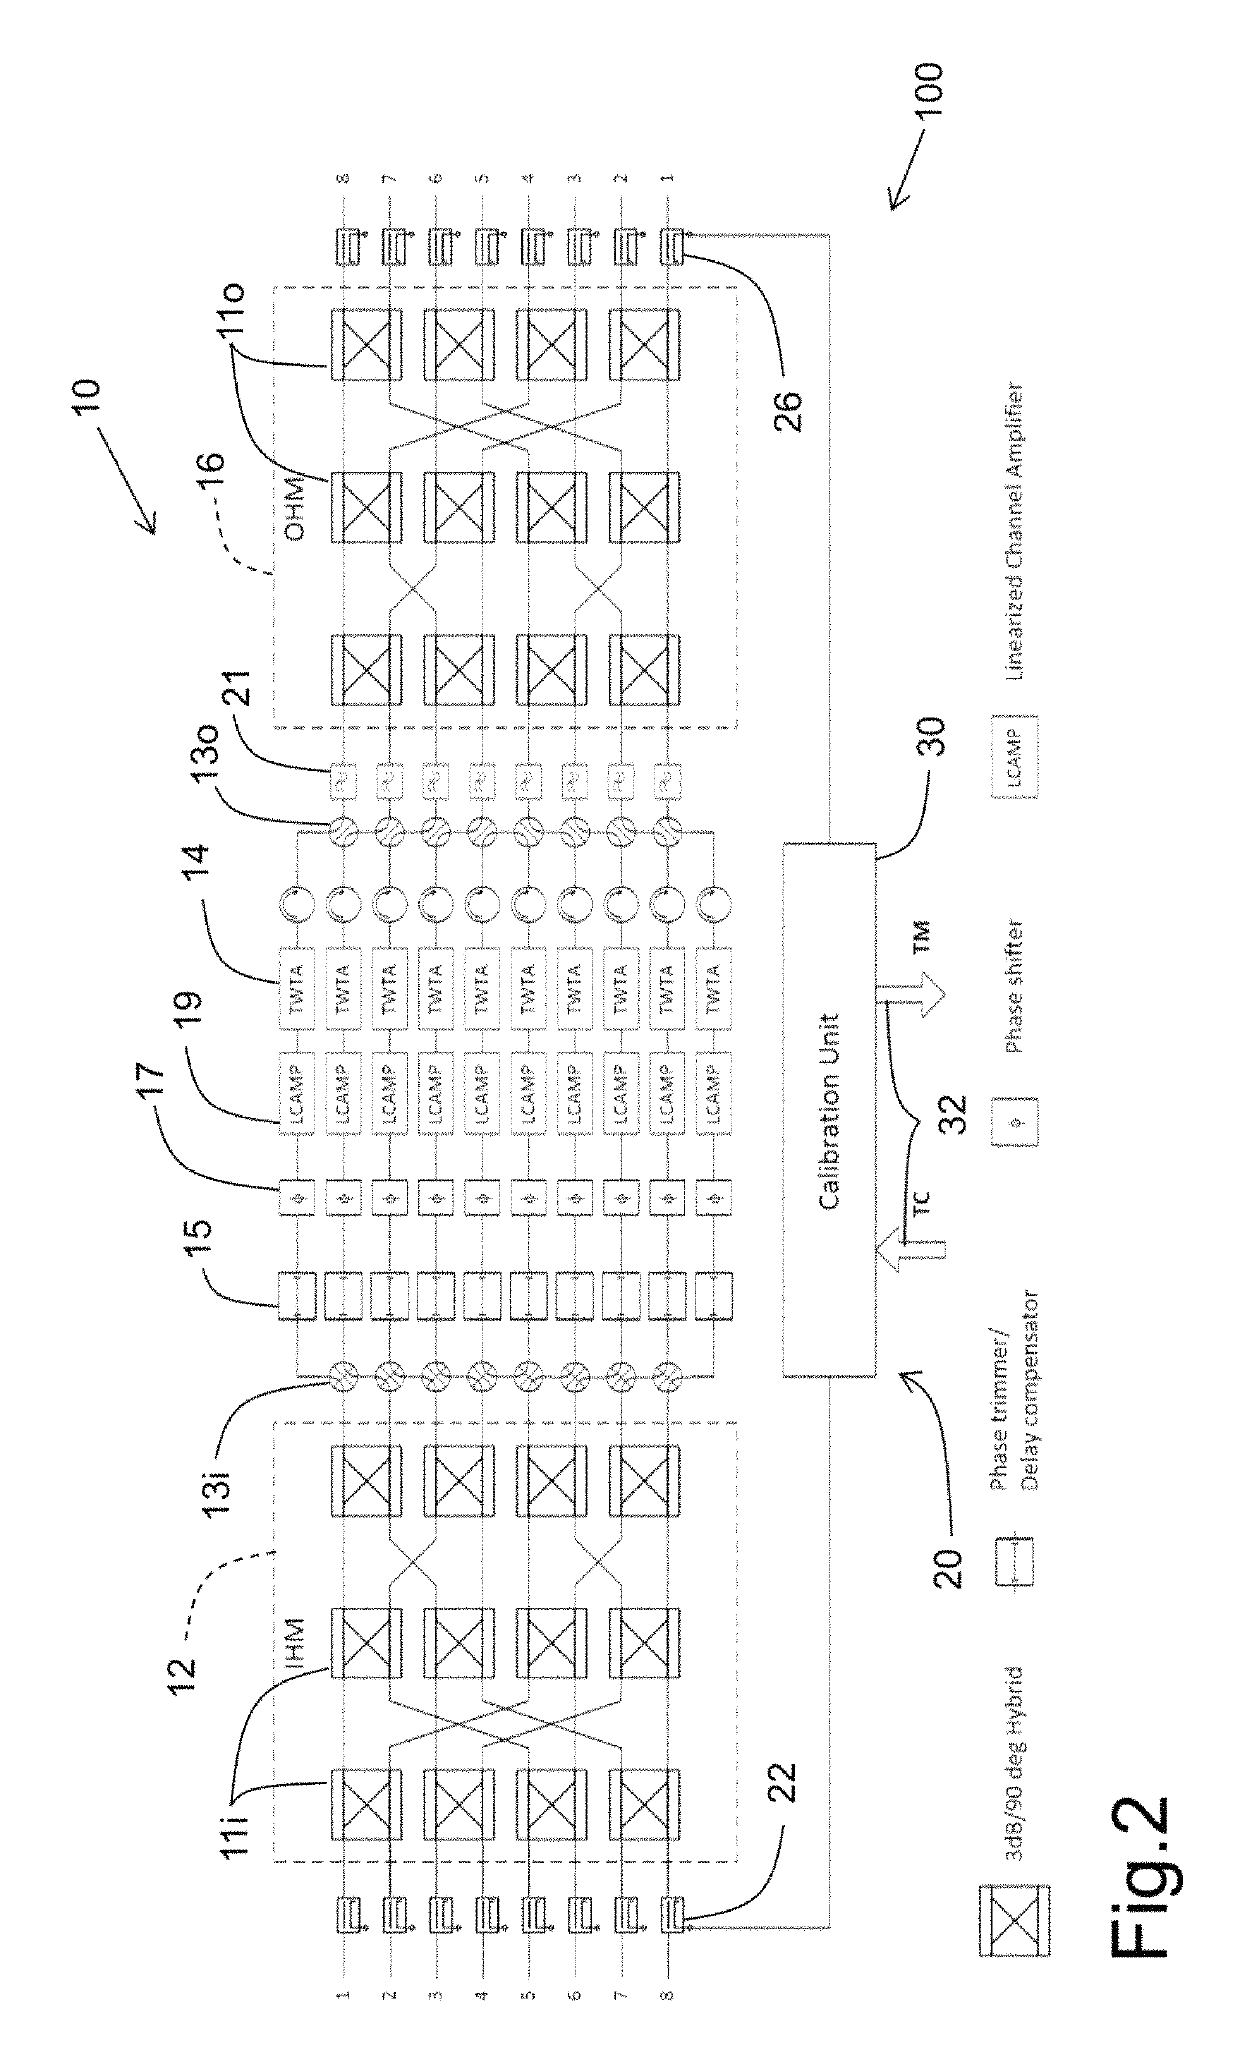 Calibration system and method for optimizing leakage performance of a multi-port amplifier